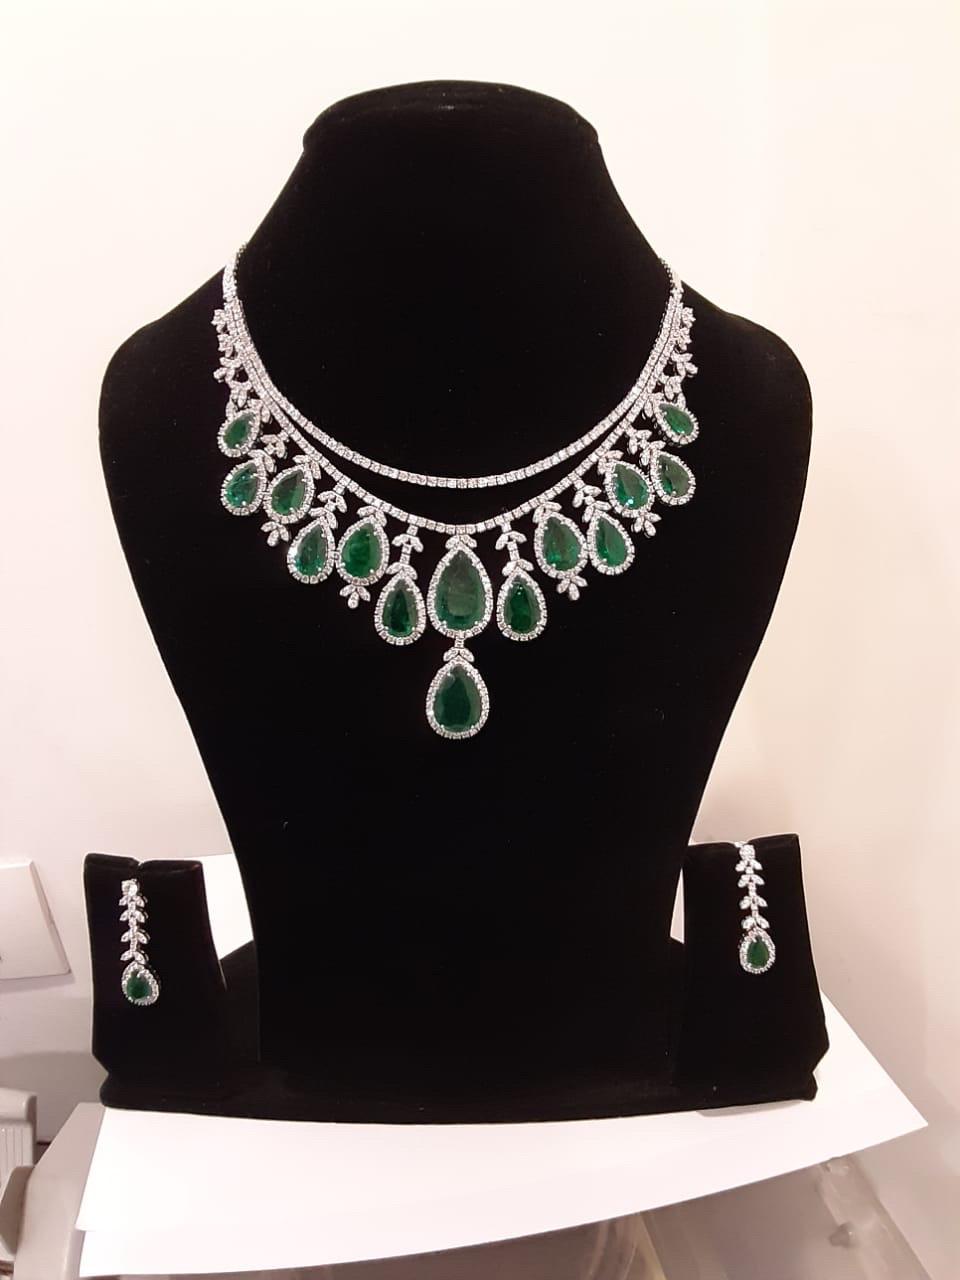 75 Ct Zambian Emerald and 30 Ct Diamond Necklace and Earring Bridal Suite For Sale 4